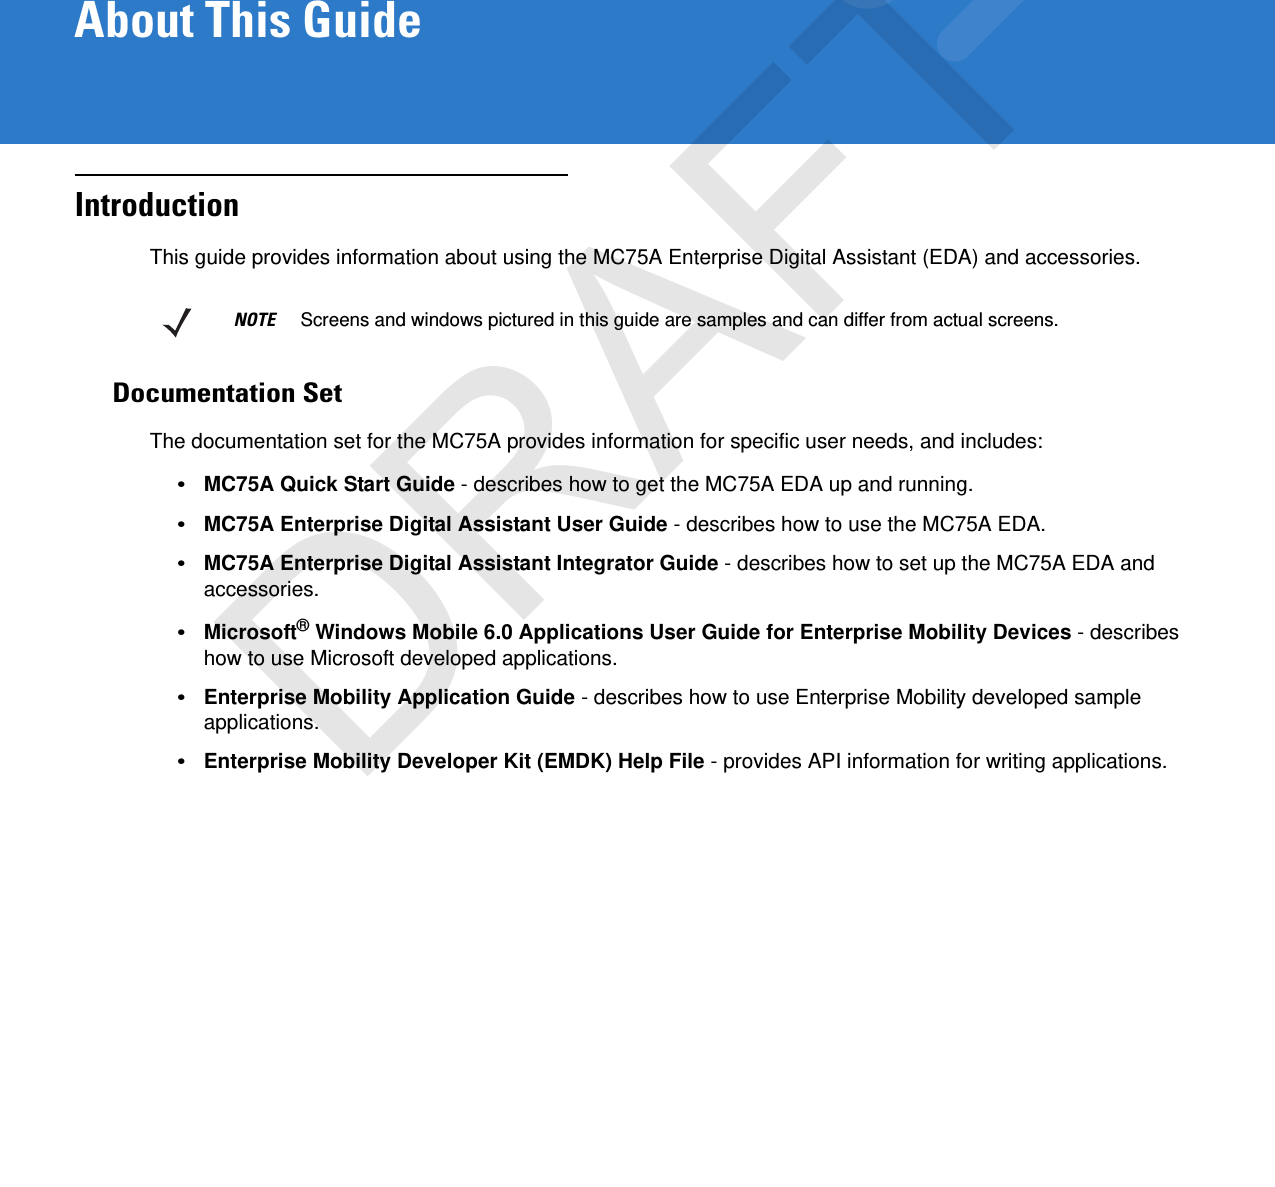 About This GuideIntroductionThis guide provides information about using the MC75A Enterprise Digital Assistant (EDA) and accessories.Documentation SetThe documentation set for the MC75A provides information for specific user needs, and includes:•MC75A Quick Start Guide - describes how to get the MC75A EDA up and running.•MC75A Enterprise Digital Assistant User Guide - describes how to use the MC75A EDA.•MC75A Enterprise Digital Assistant Integrator Guide - describes how to set up the MC75A EDA and accessories.•Microsoft® Windows Mobile 6.0 Applications User Guide for Enterprise Mobility Devices - describes how to use Microsoft developed applications.•Enterprise Mobility Application Guide - describes how to use Enterprise Mobility developed sample applications.•Enterprise Mobility Developer Kit (EMDK) Help File - provides API information for writing applications.NOTE     Screens and windows pictured in this guide are samples and can differ from actual screens.DRAFT